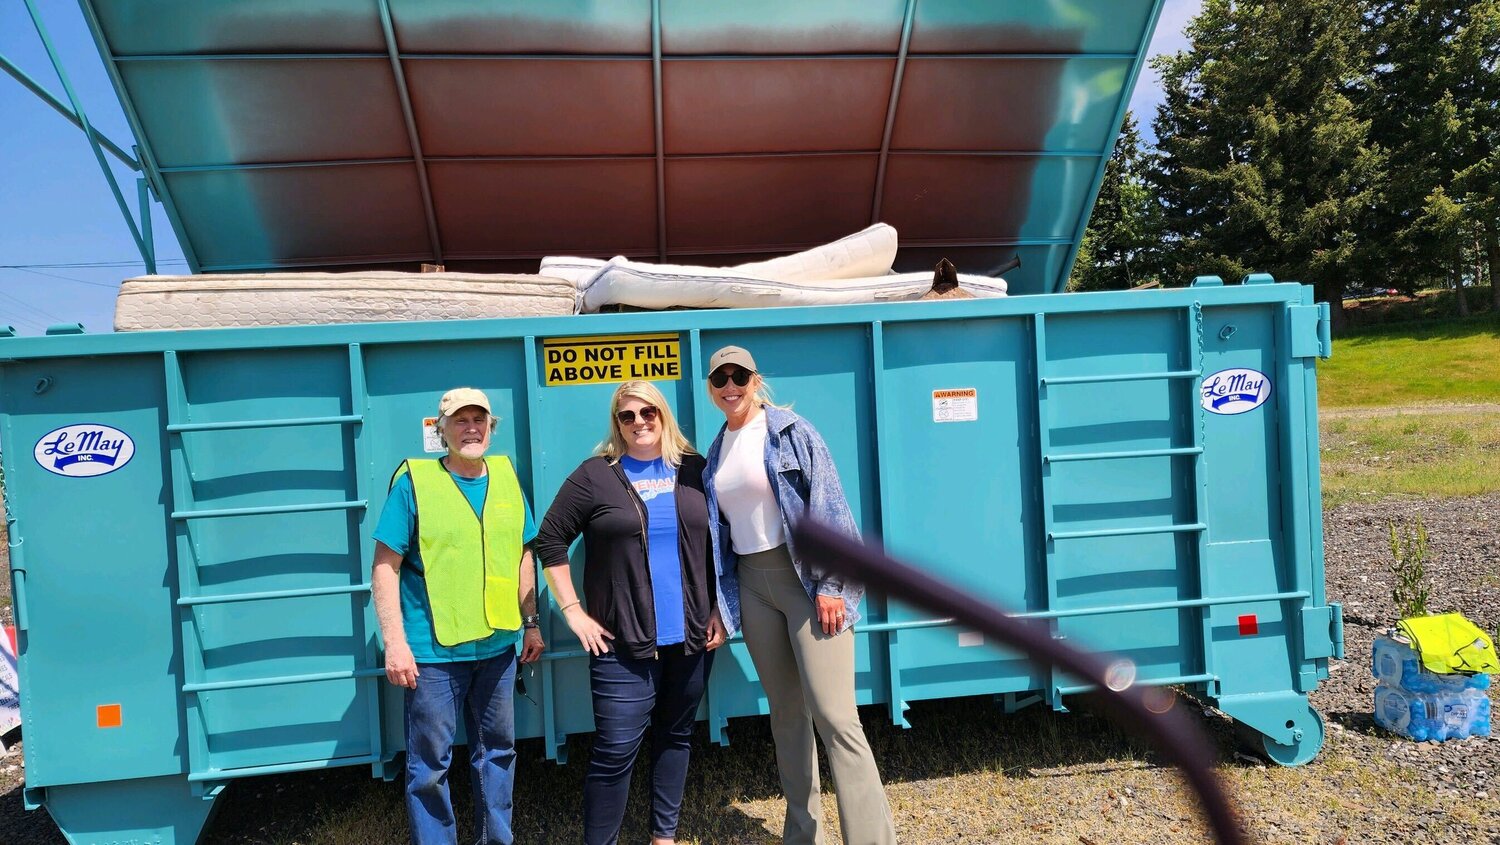 Chehalis Mayor Tony Ketchum, Experience Chehalis Executive Director Annalee Tobey and Visiting Nurses Foundation Executive Director Jacki Jewell are pictured in front of a full LeMay Inc. dumpster at the Chehalis Fire Station. Photo courtesy City of Chehalis. 